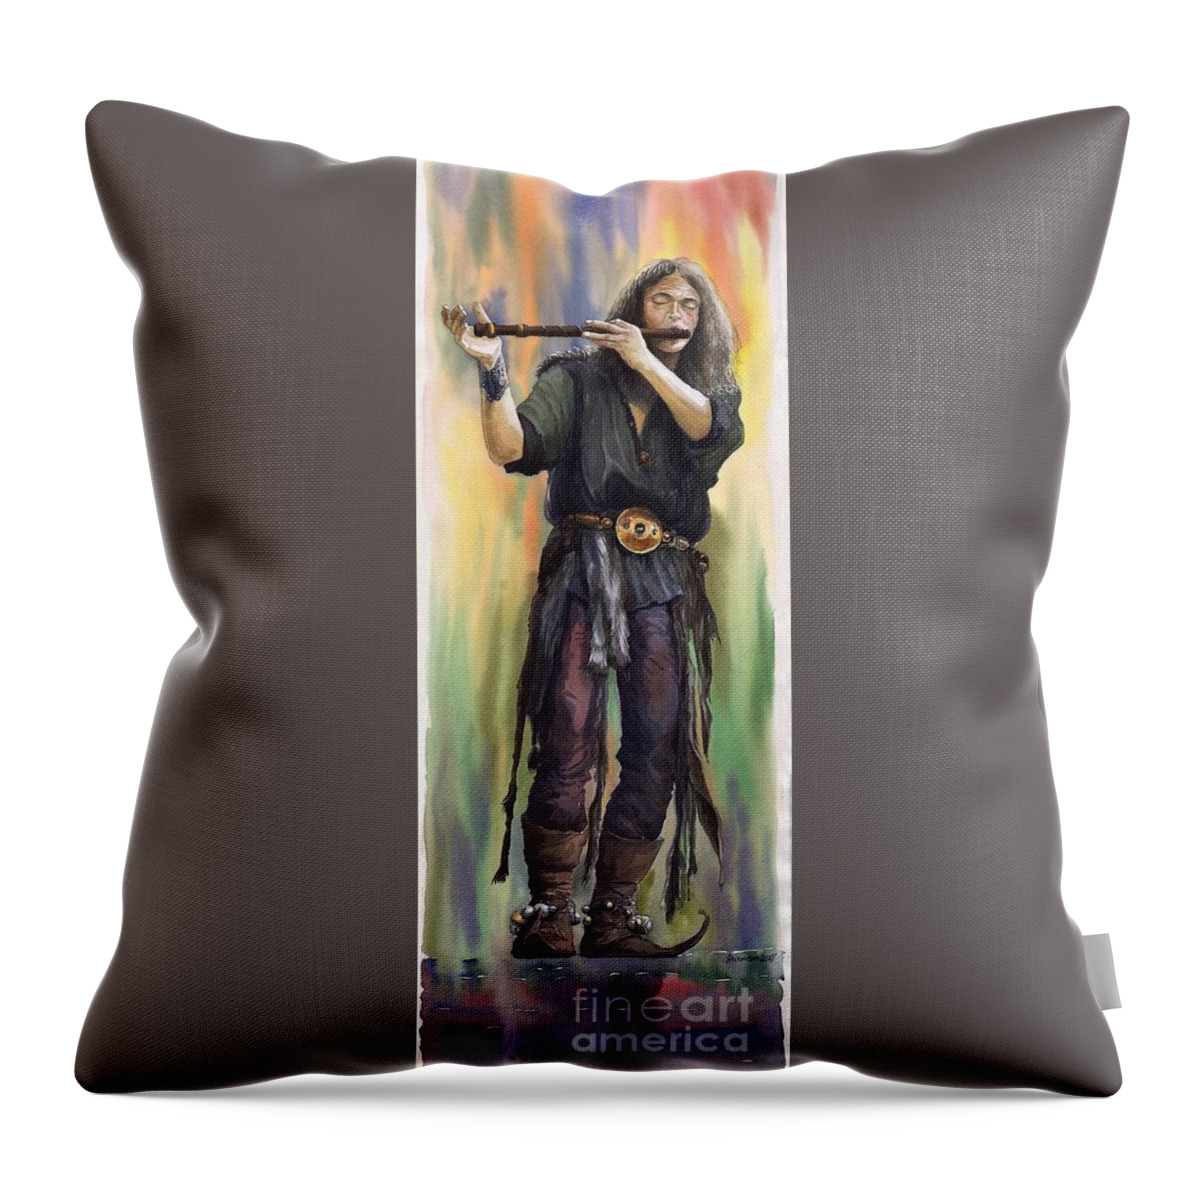 Instrument Throw Pillow featuring the painting Varius Coloribus The Morning Song Nils by Yuriy Shevchuk